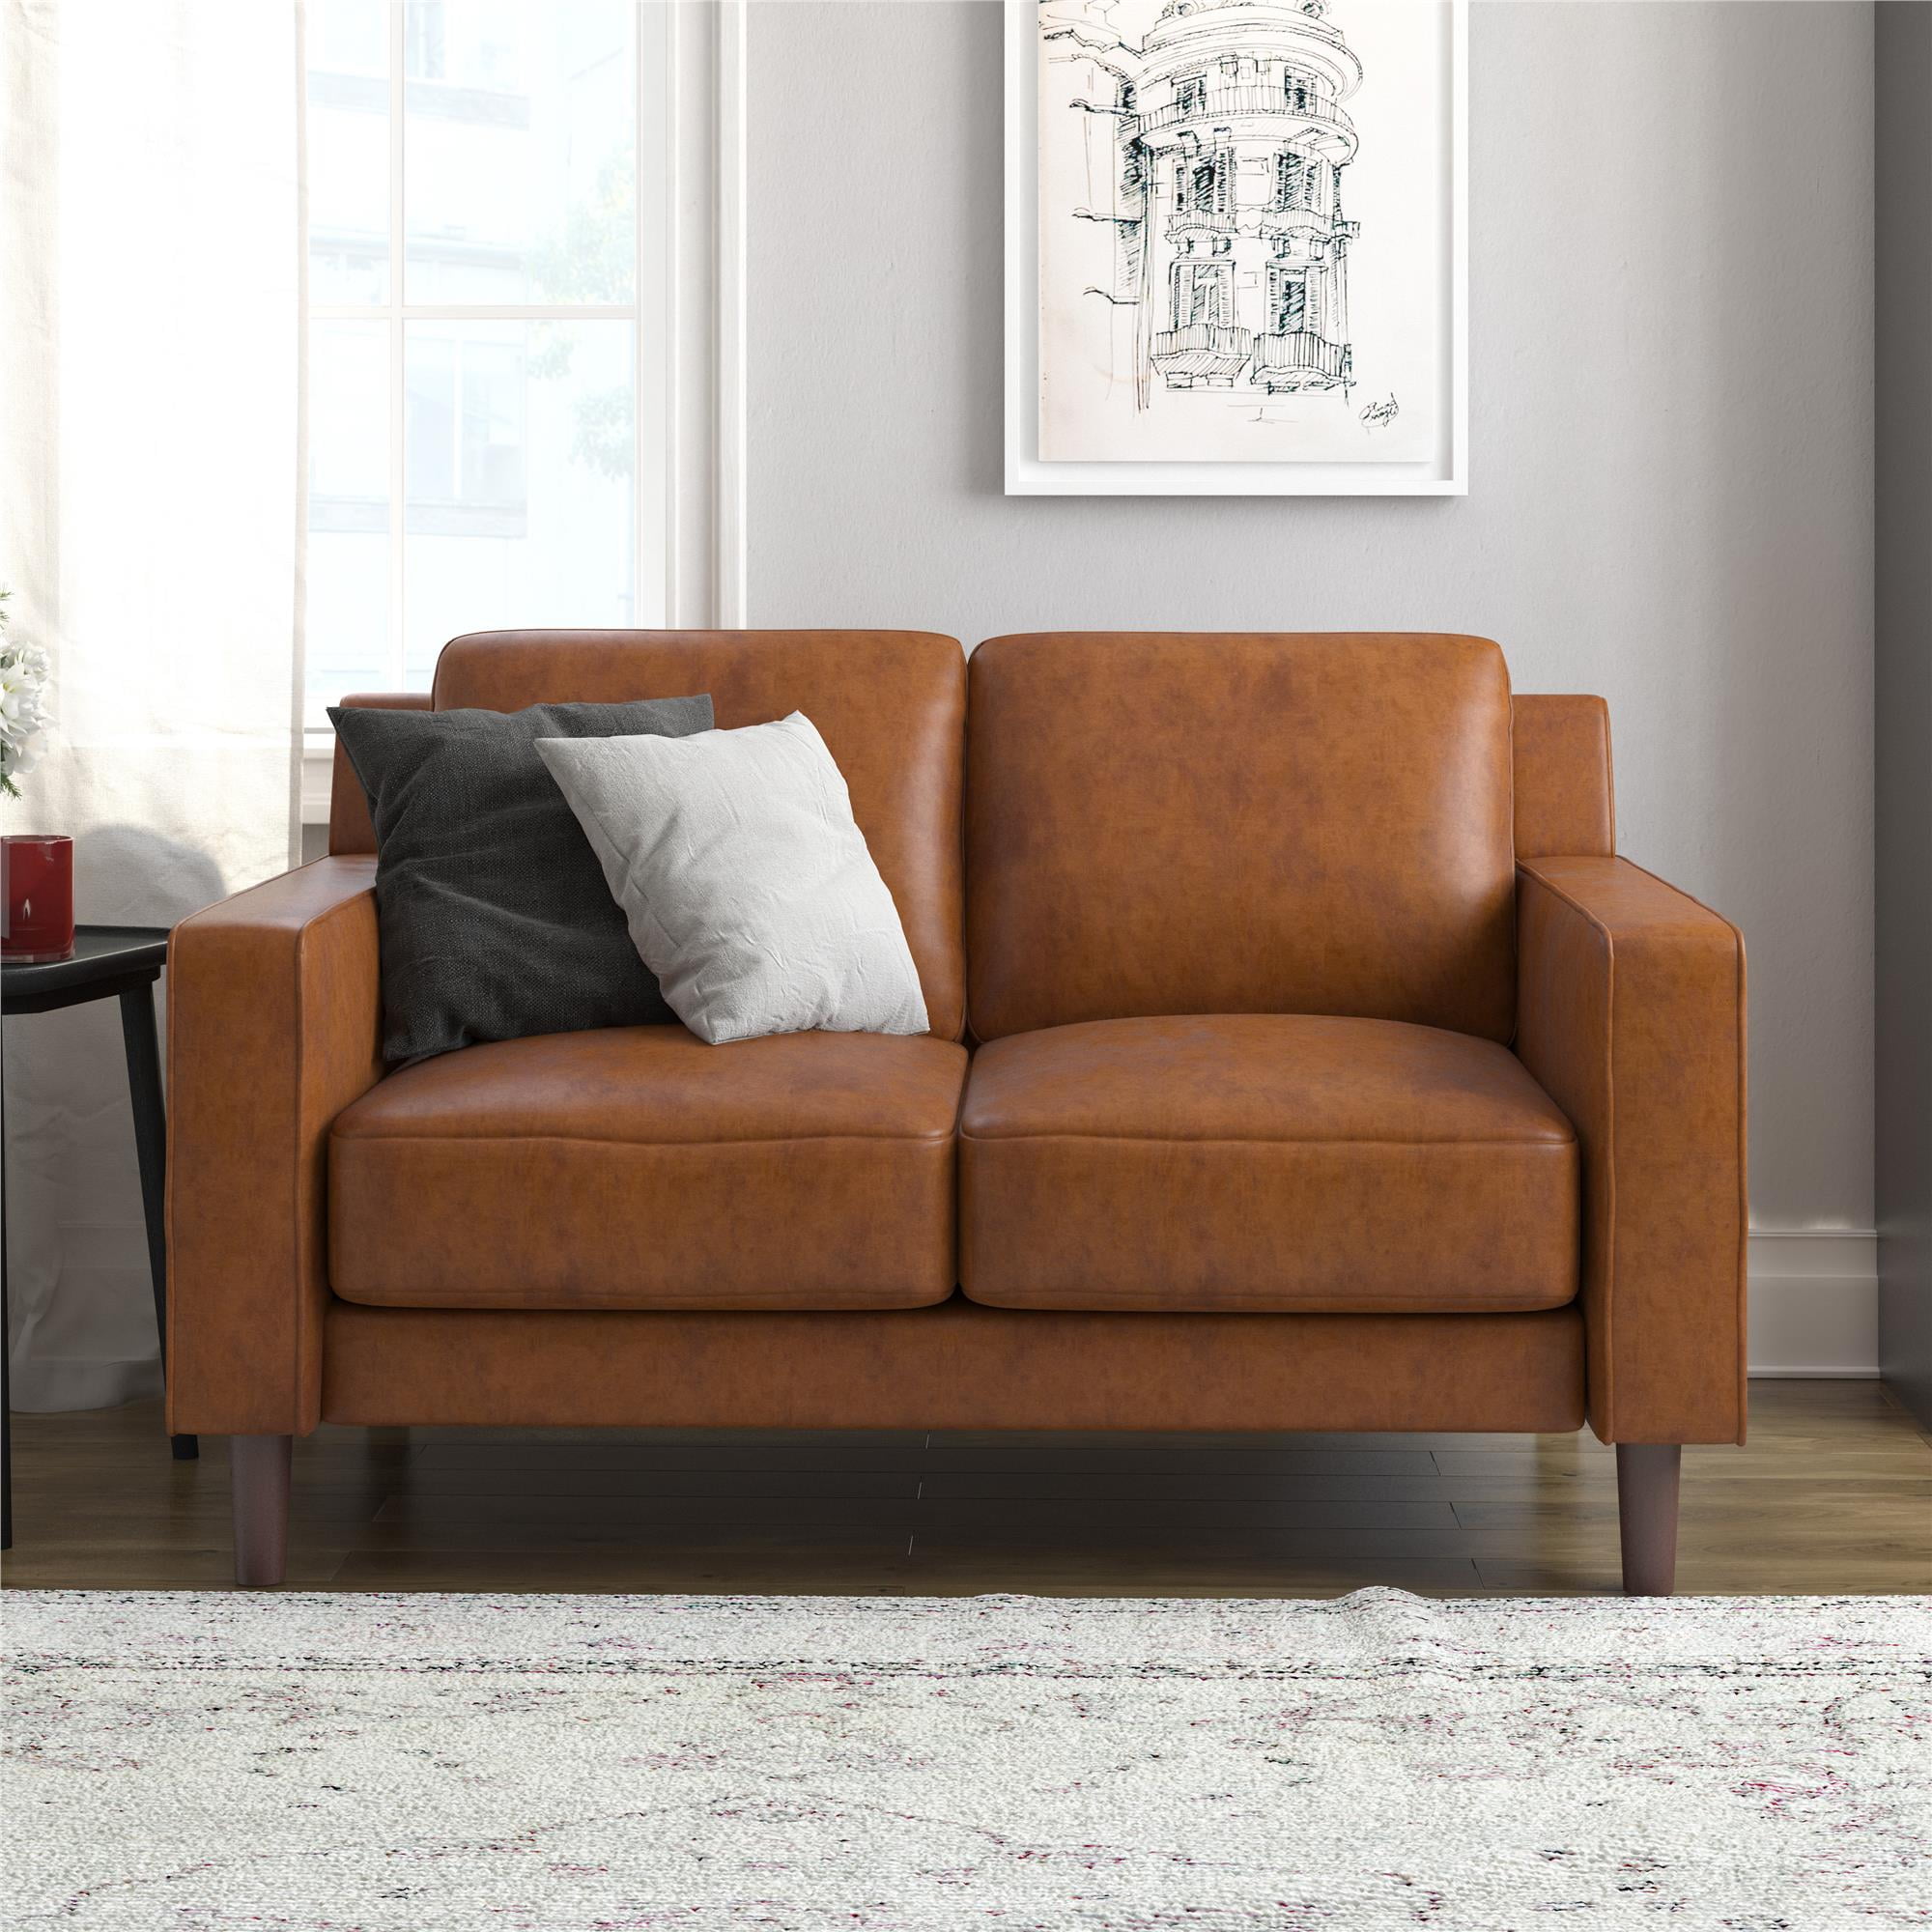 DHP Bryanna Loveseat 2 Seater Camel Sofa Leather , Faux